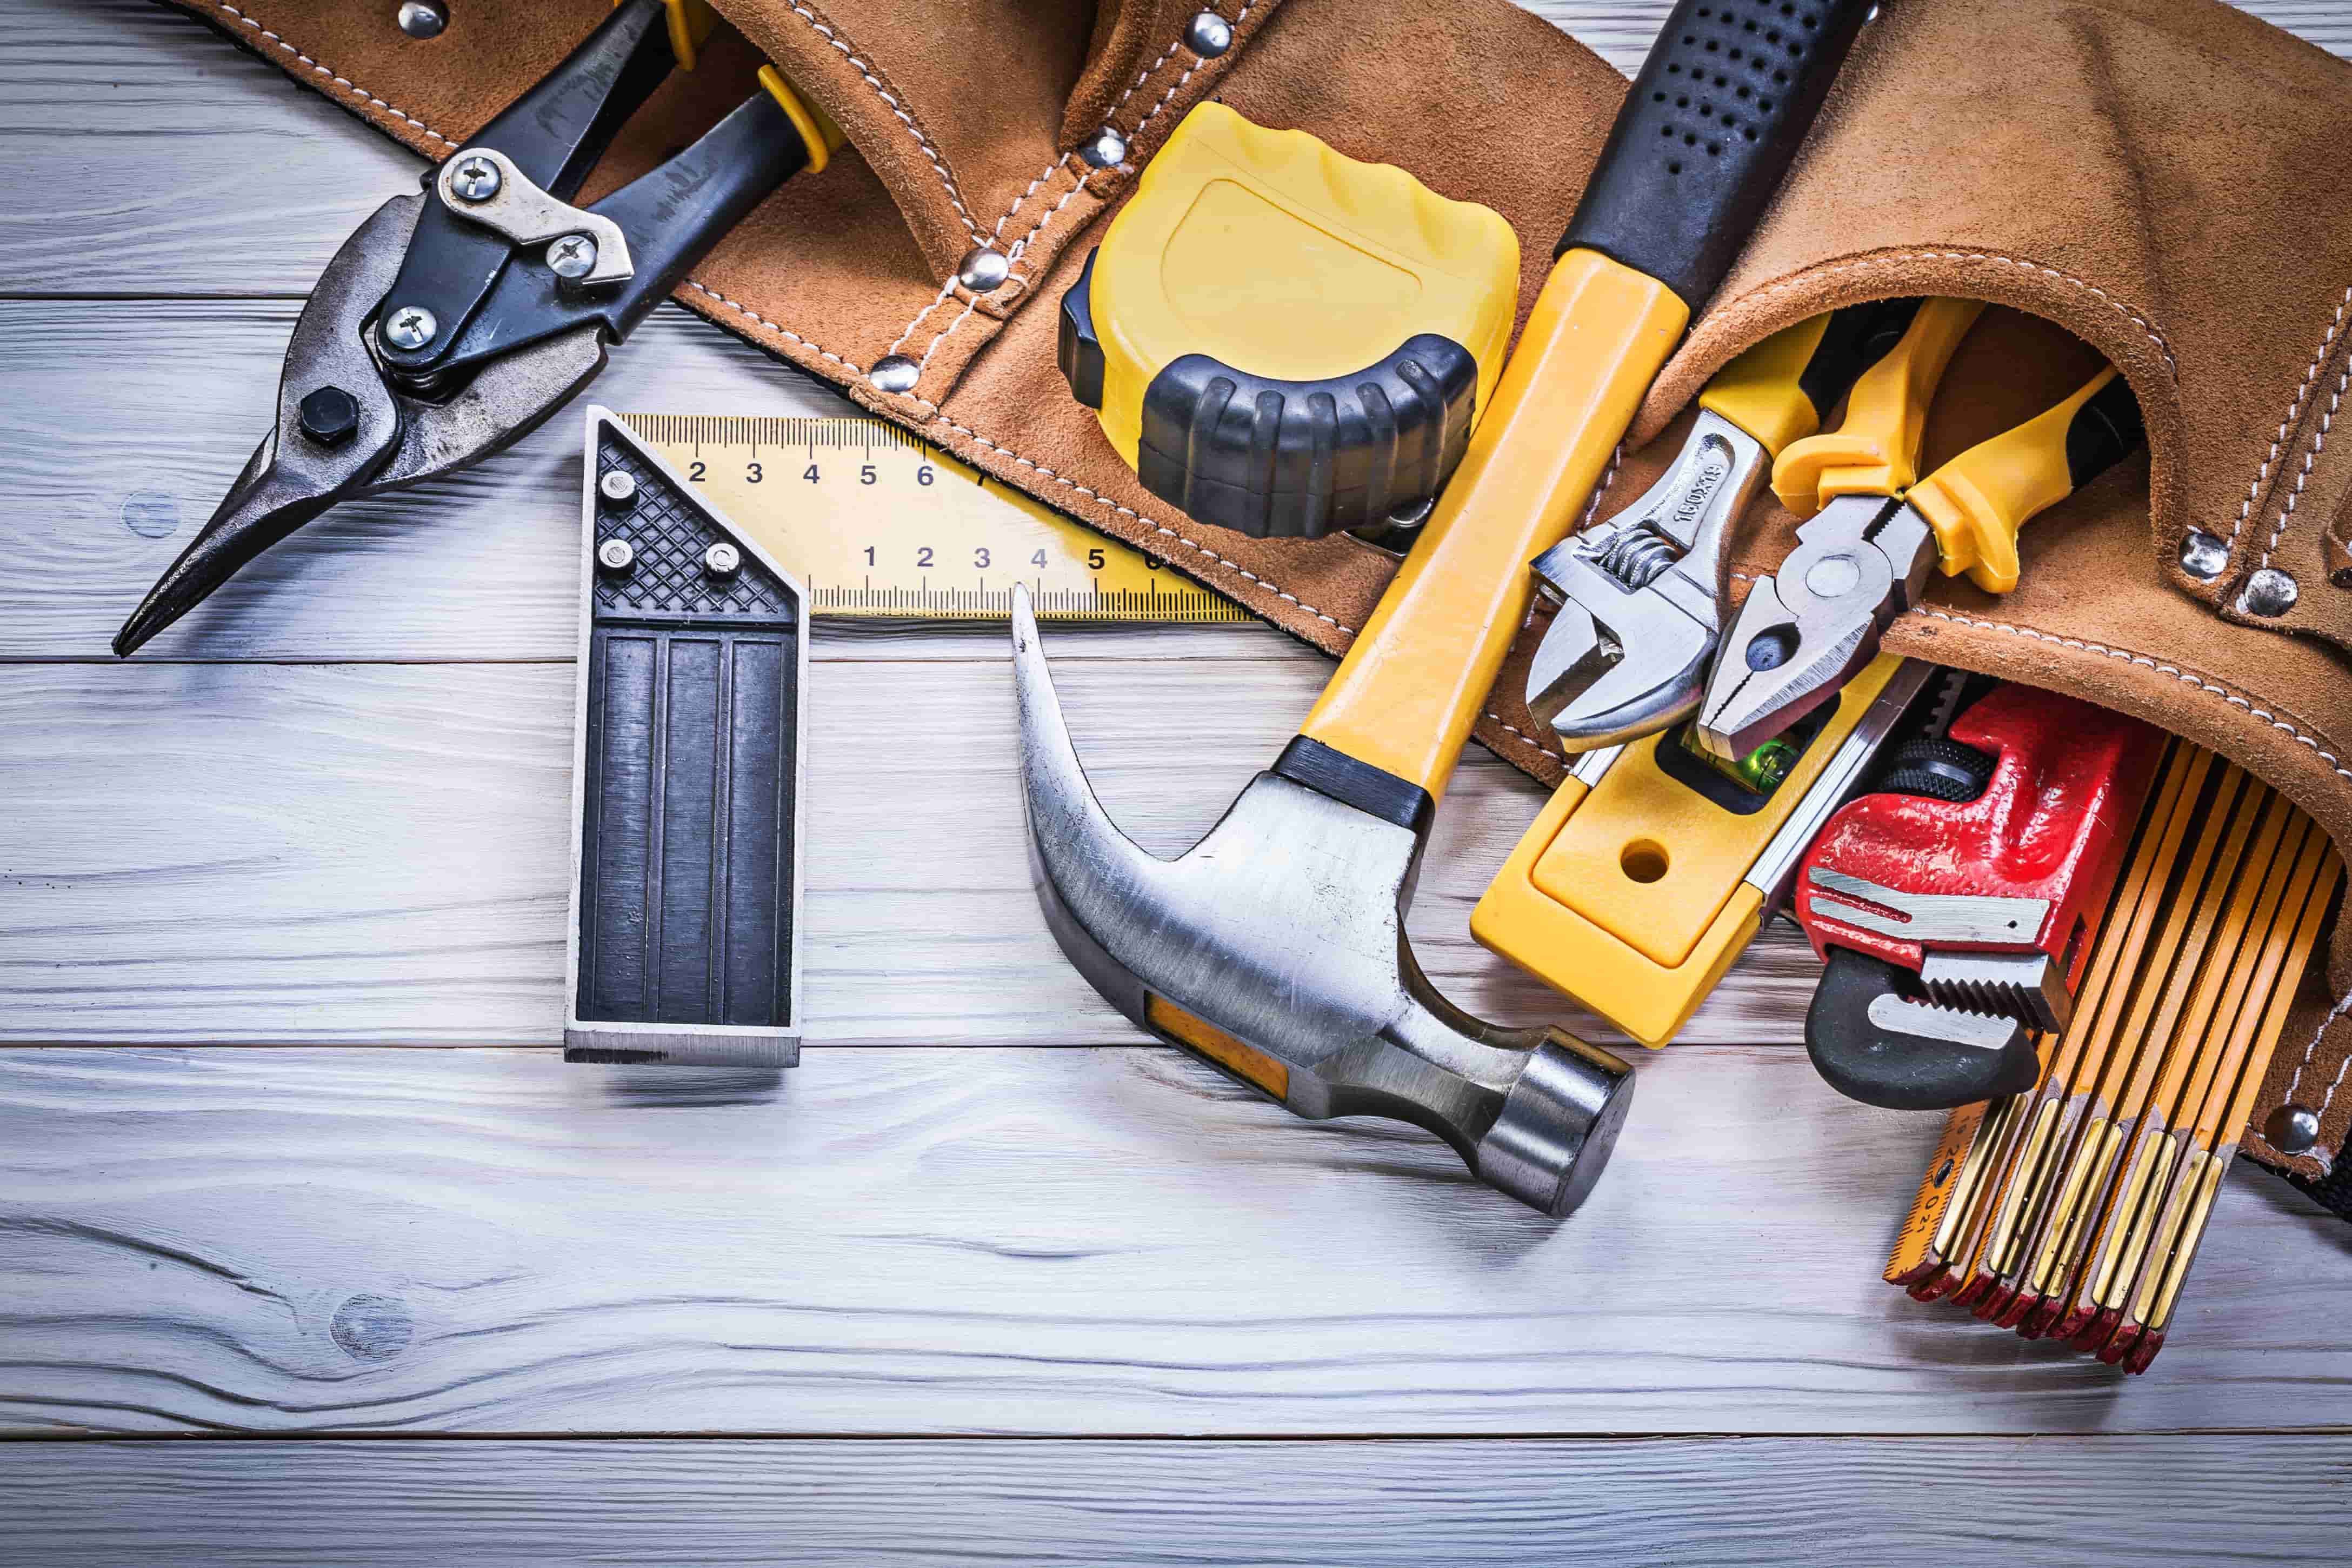 Home Inspector Tools of the Trade » Stratford Career Institute Blog